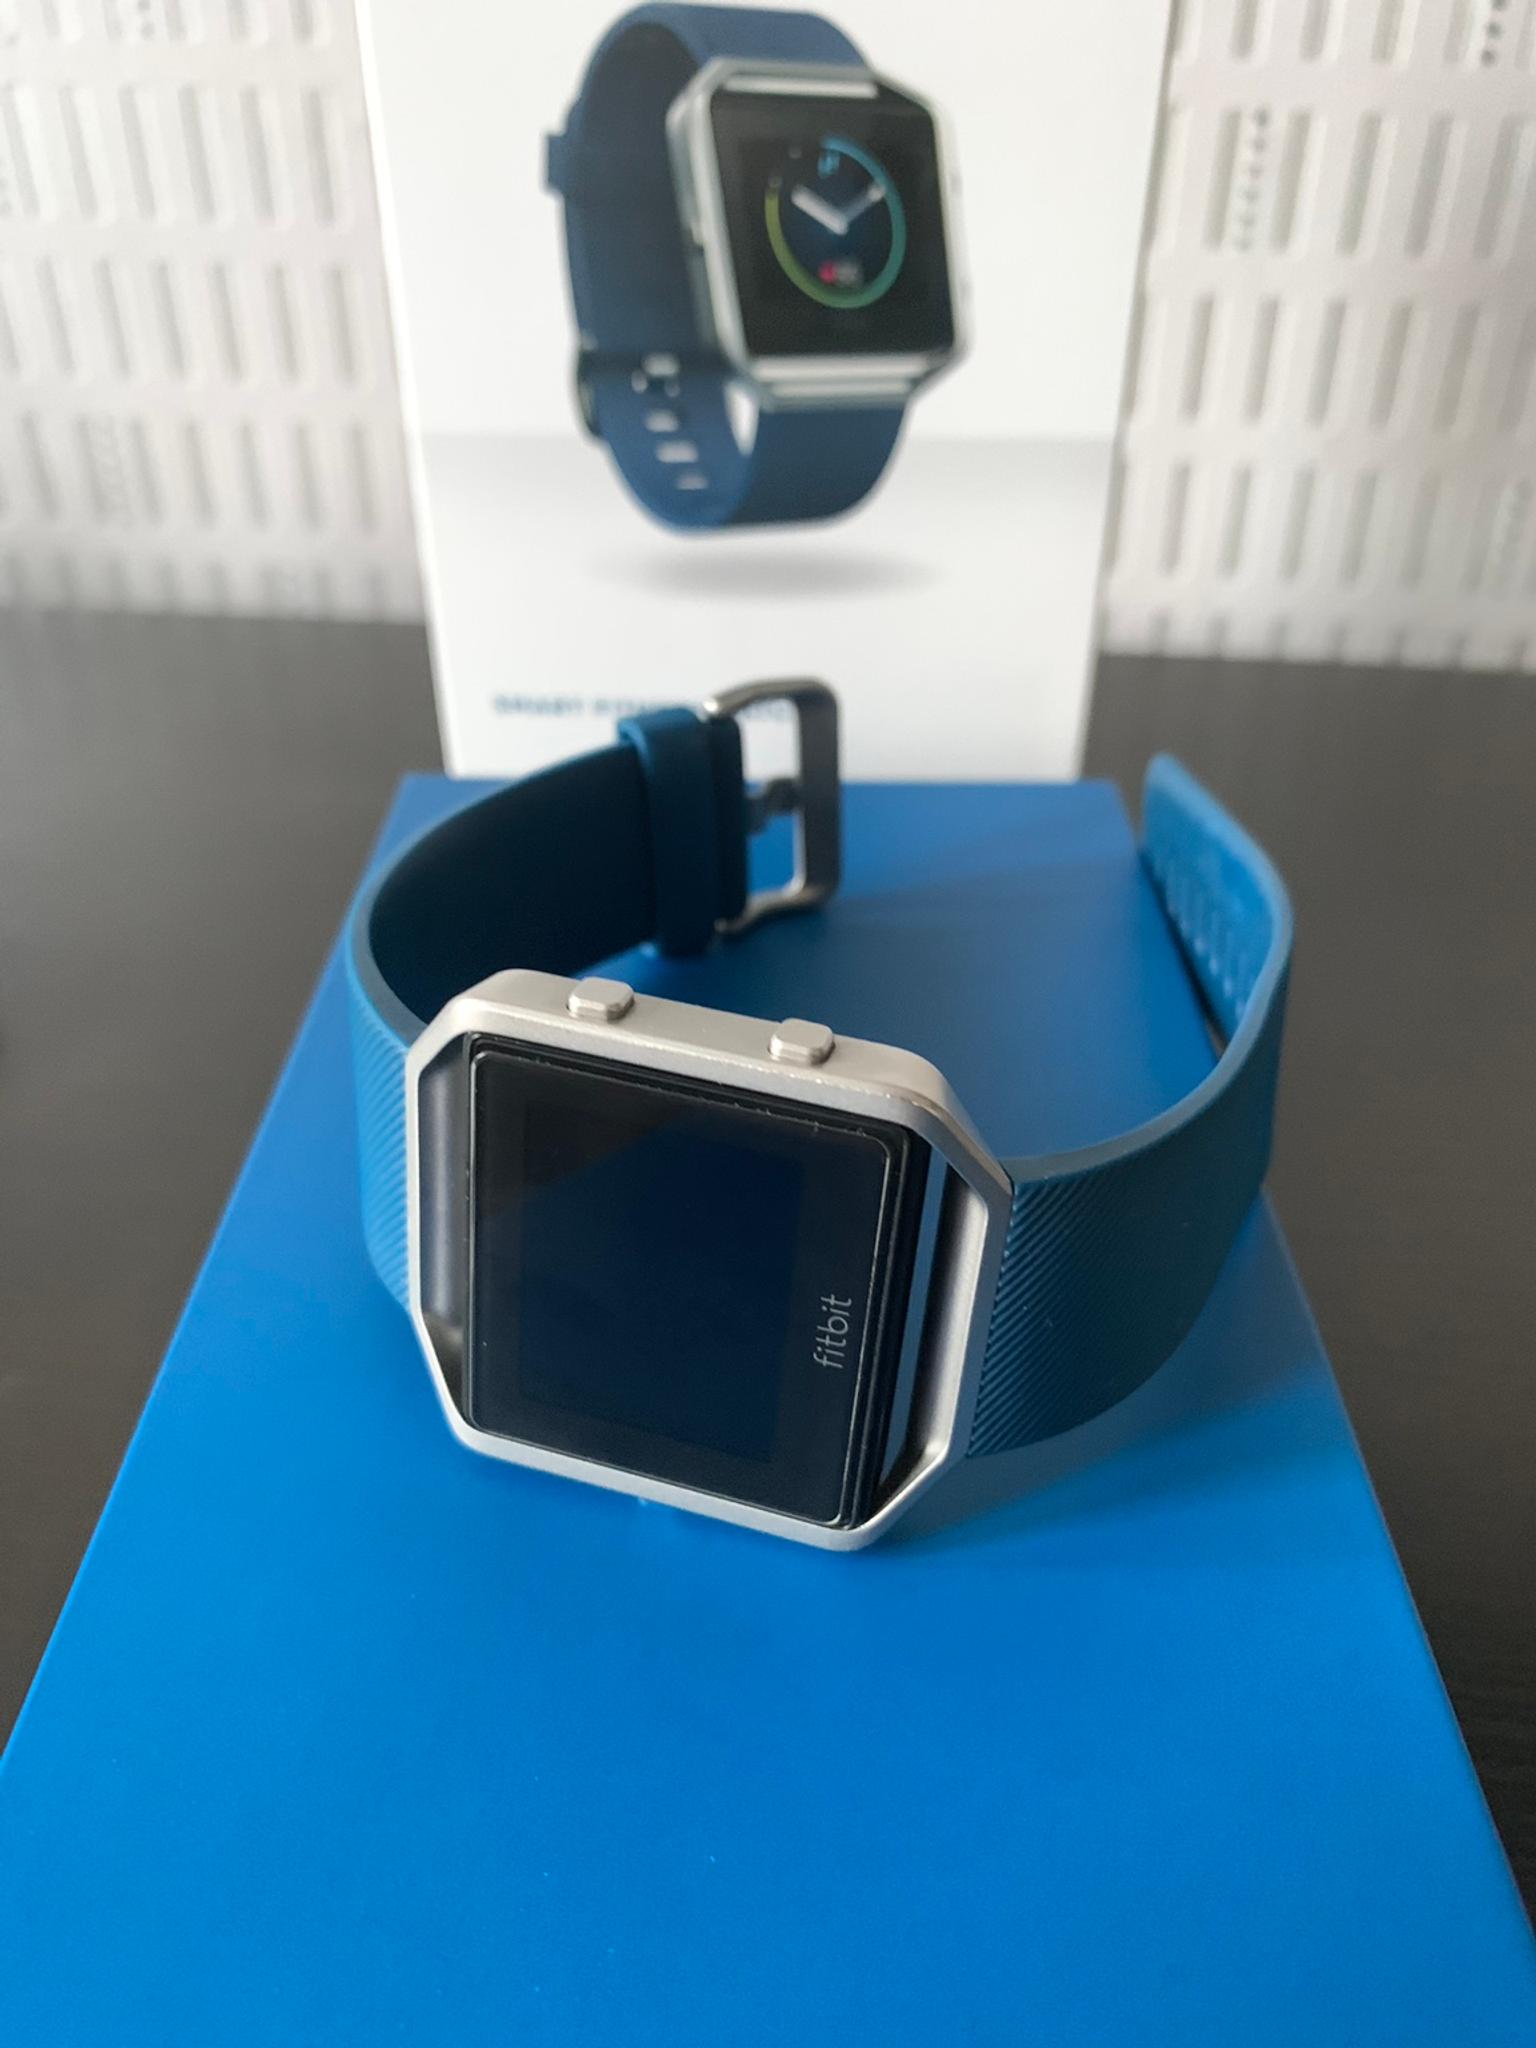 fitbit blaze for sale used